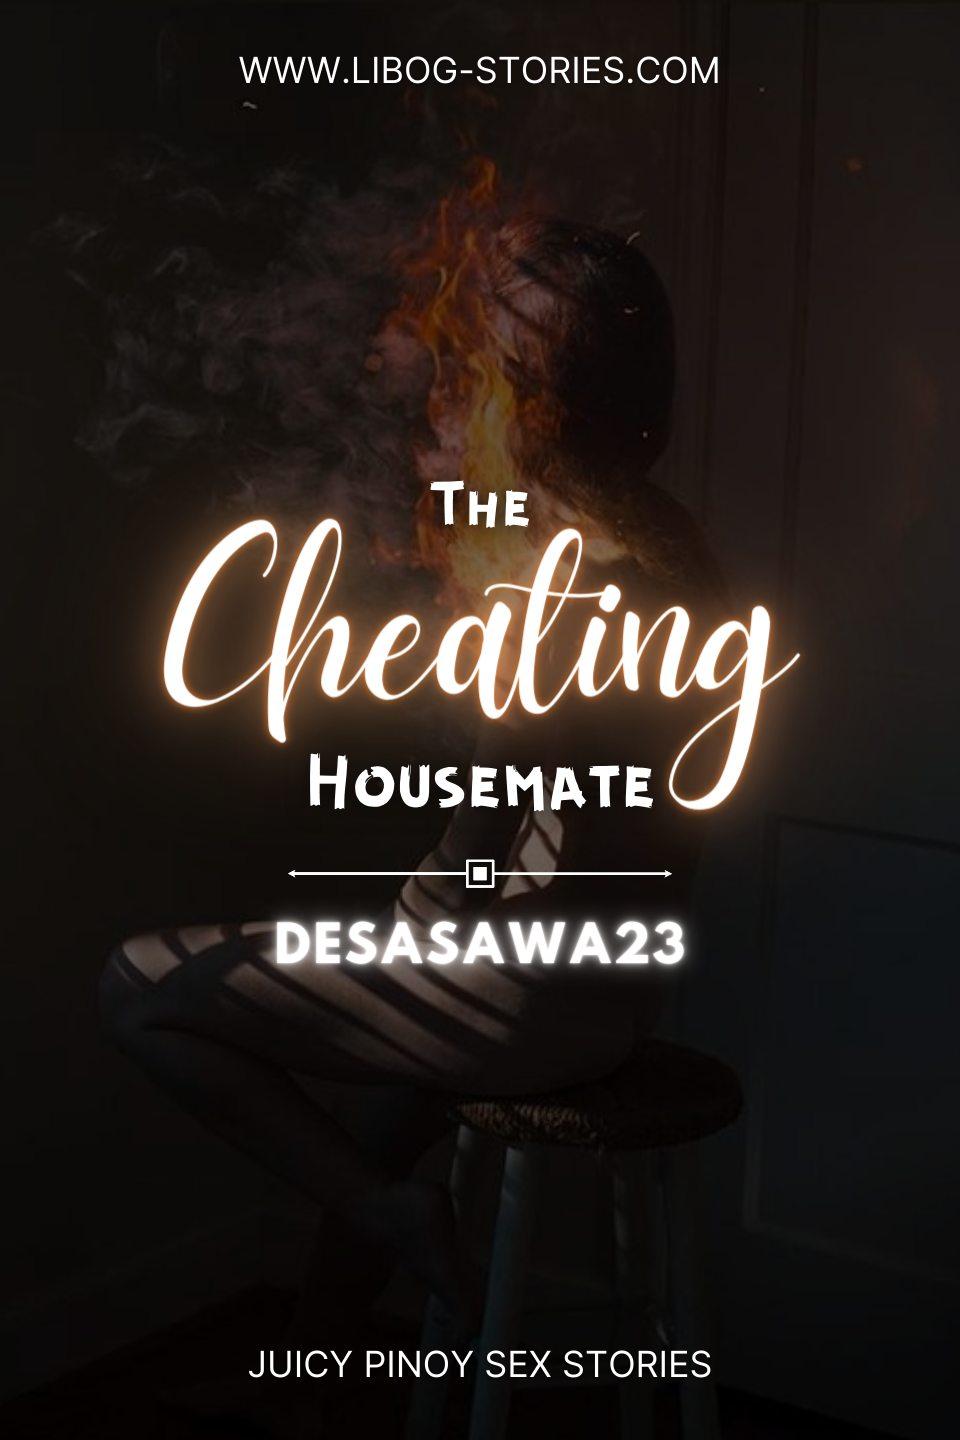 The Cheating Housemate